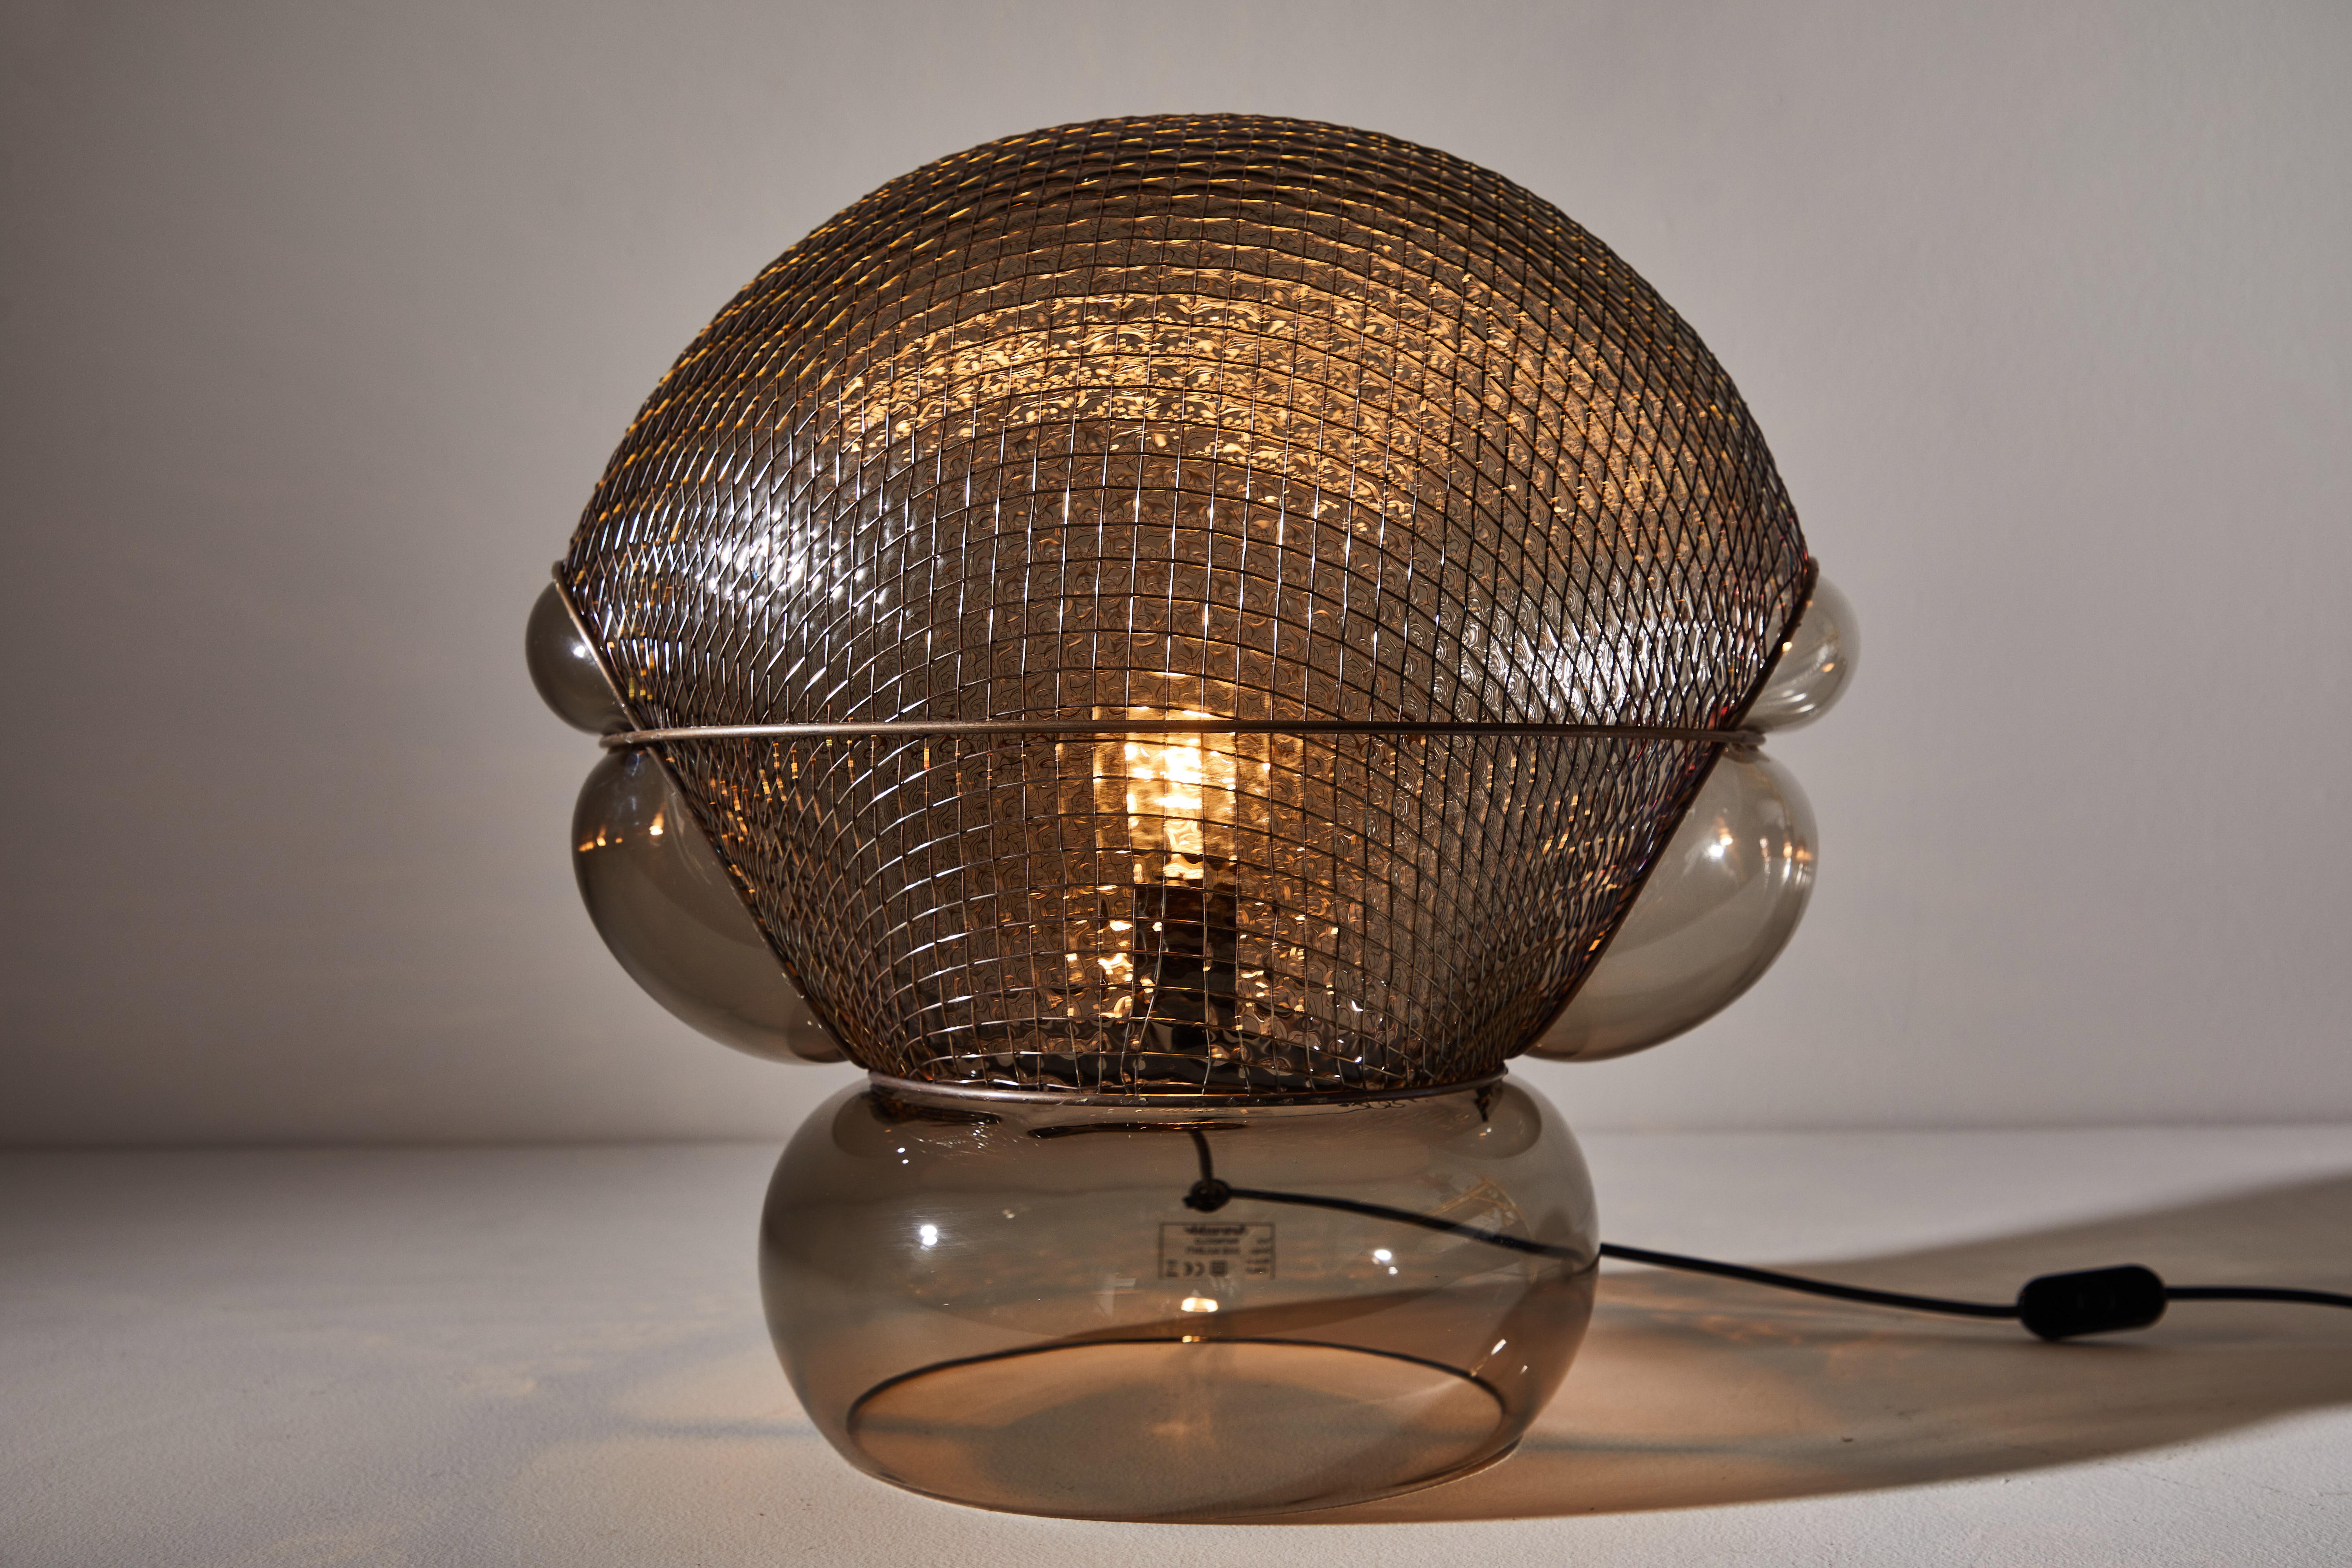 Patroclo table lamp by Gae Aulenti originally designed in 1975. Current vintage deadstock edition produced in Italy by Artemide. Comes with full range dimmer on the hand switch. Smoke colored blown glass and steel mesh. Maintains original Artemide